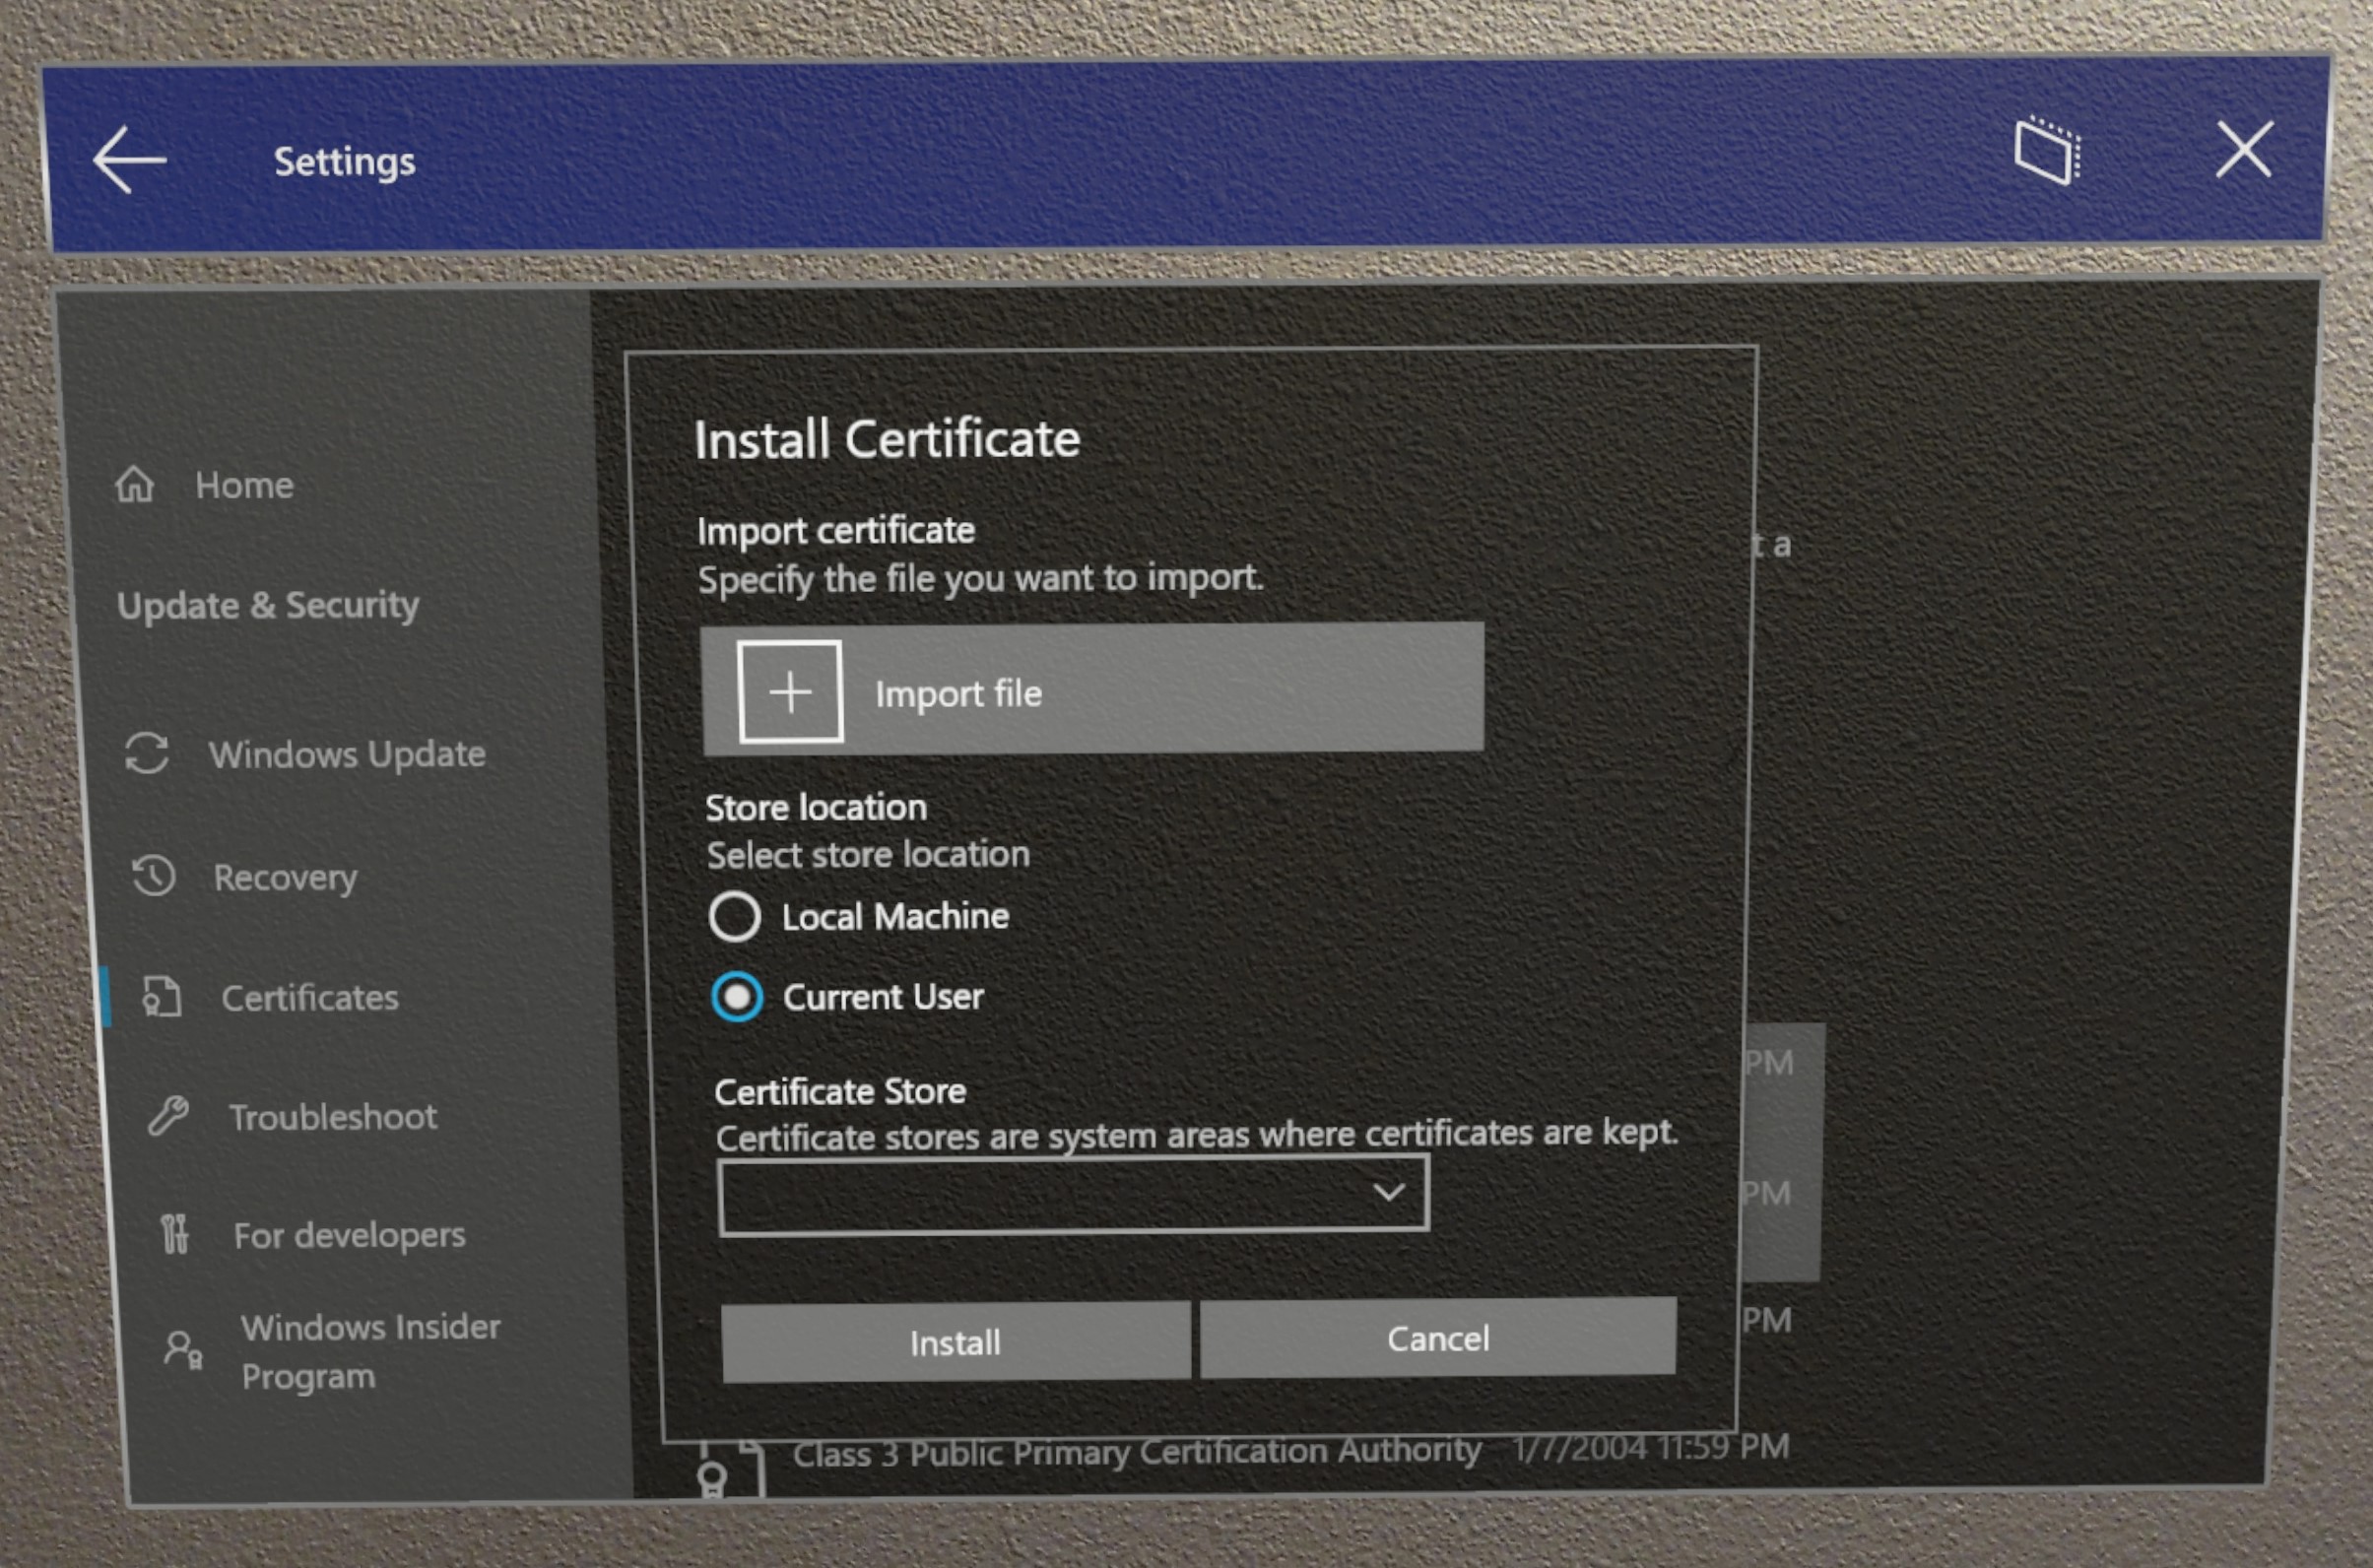 Picture showing how to use Certificate UI to install a certificate in Settings.